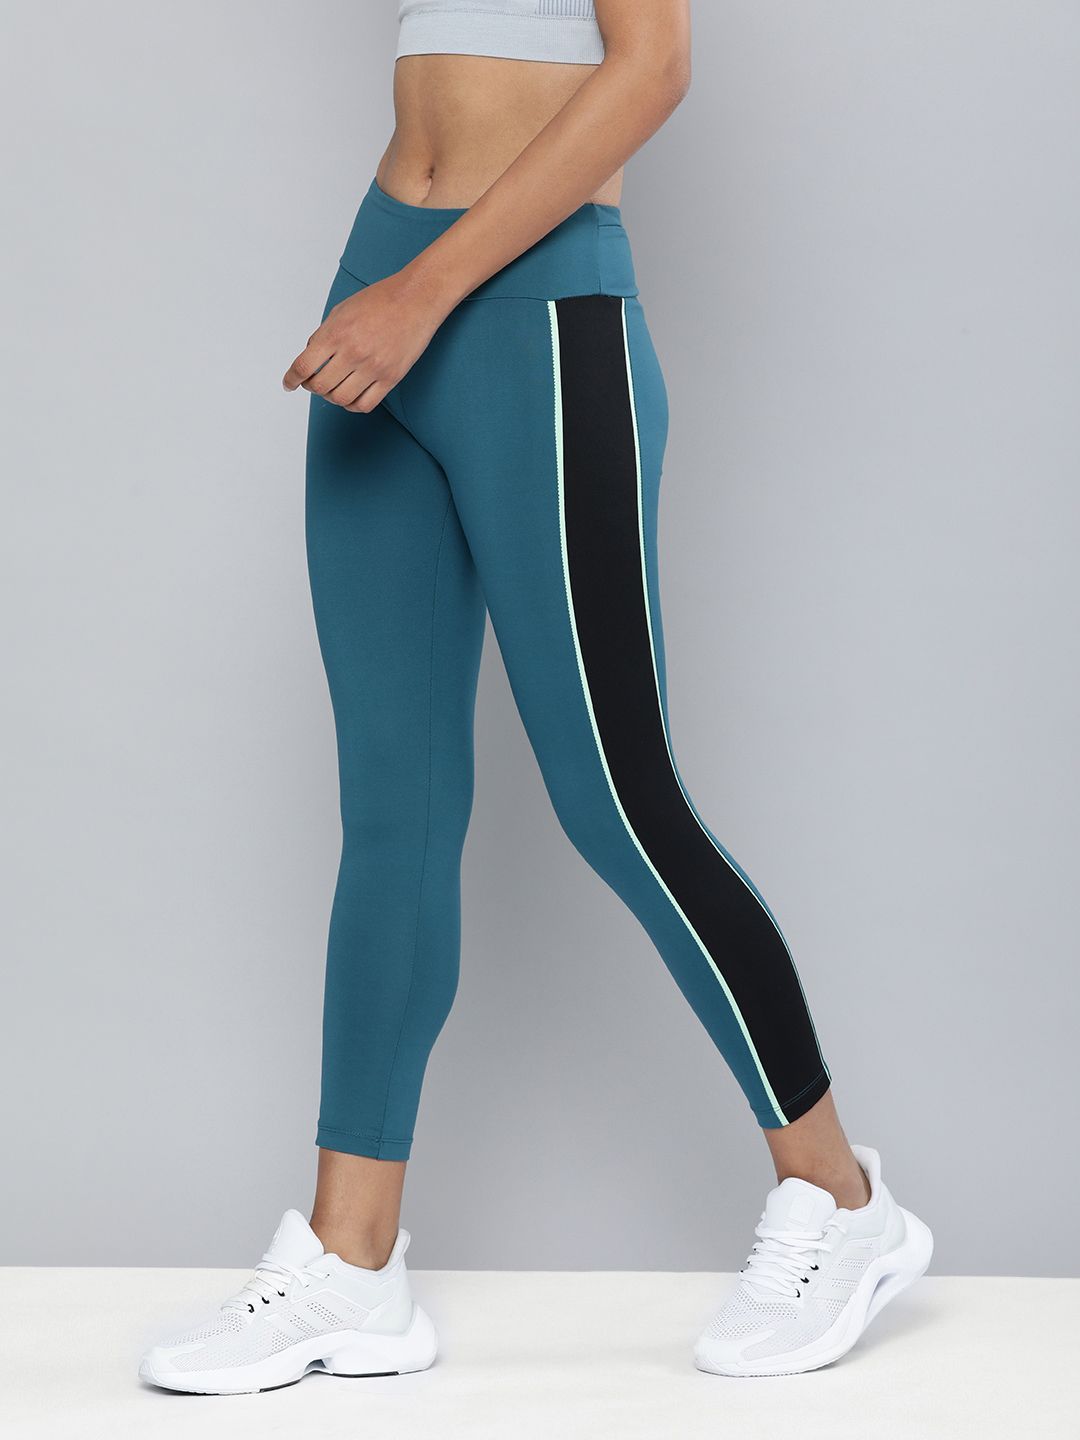 HRX By Hrithik Roshan Women Blue Coral Running Rapid-Dry Colourblocked Tights Price in India